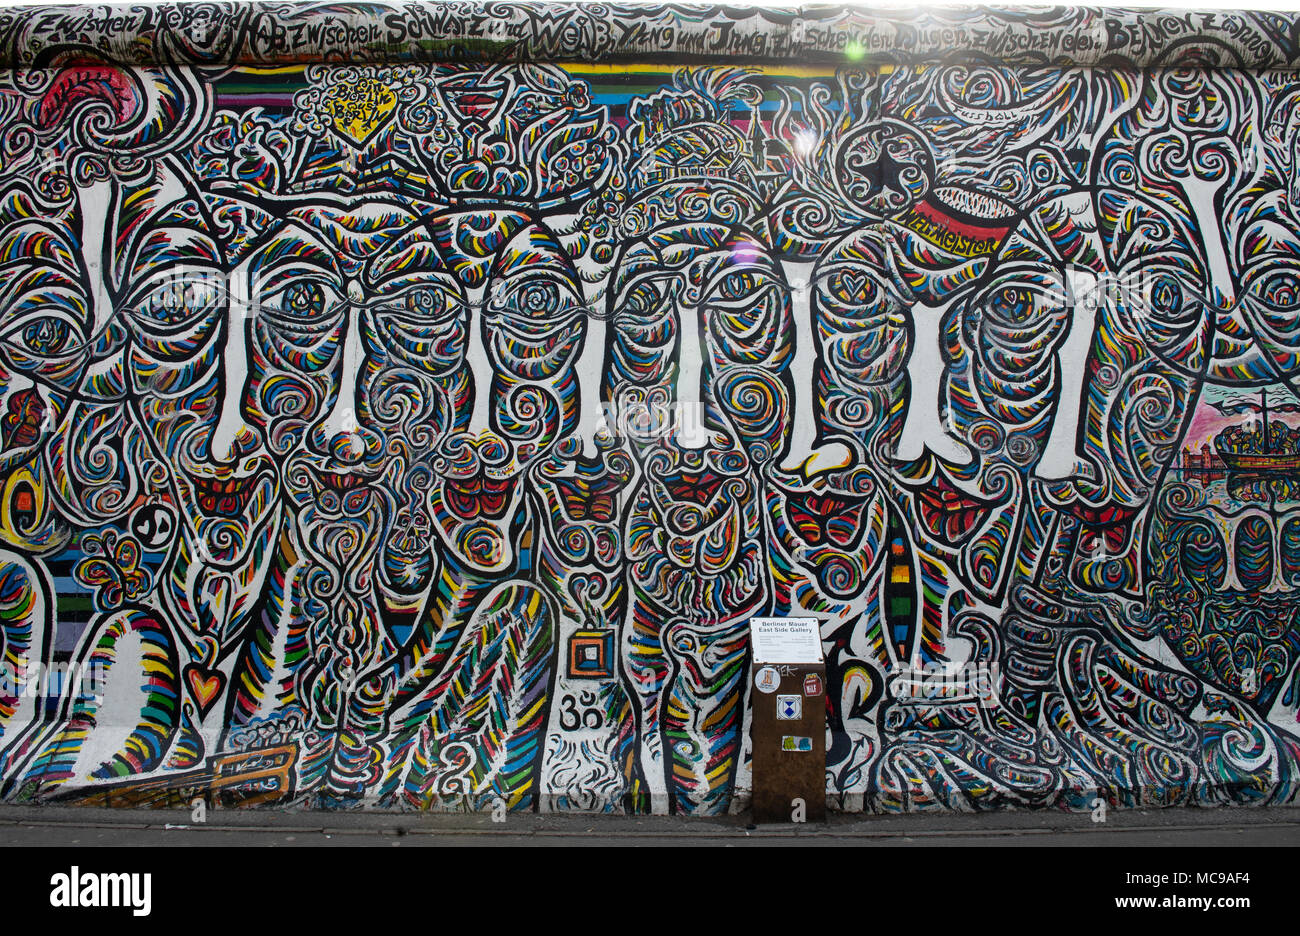 East Side Gallery. The largest remaining section of the Berlin Wall, also one of the world's largest open-air galleries. Berlin, Germany Stock Photo